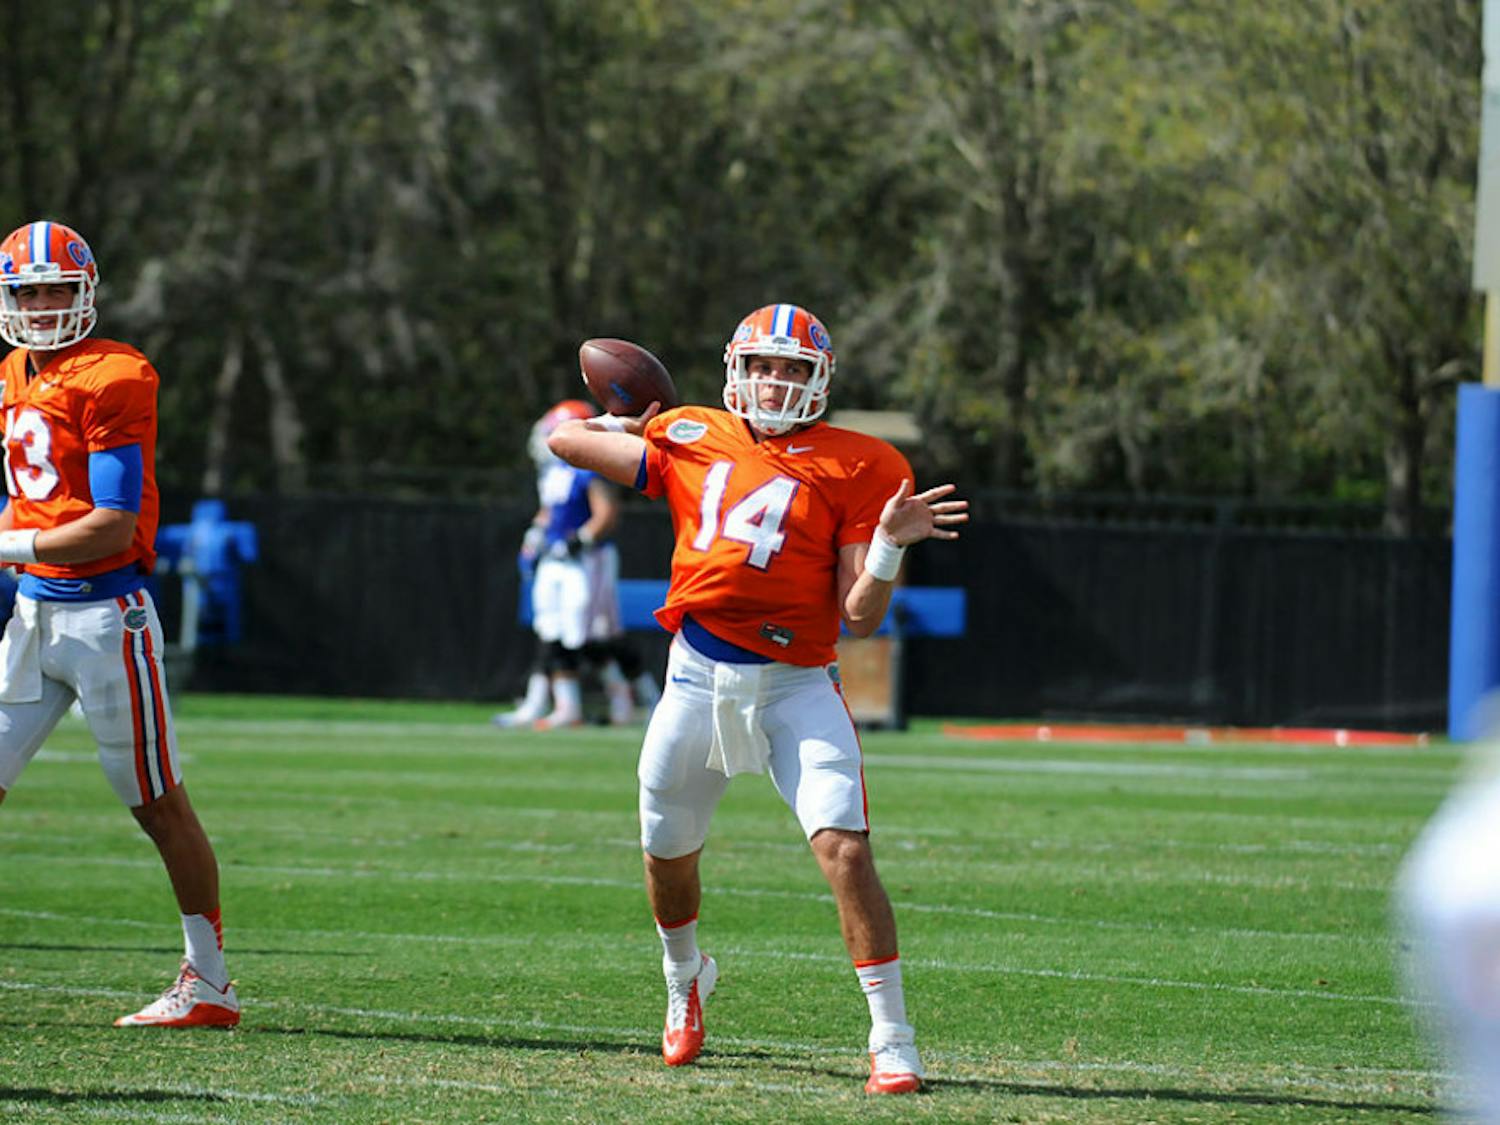 Florida quarterback Luke Del Rio throws a pass during a Spring practice on March 16, 2016, at the Sanders Practice Fields. &nbsp;